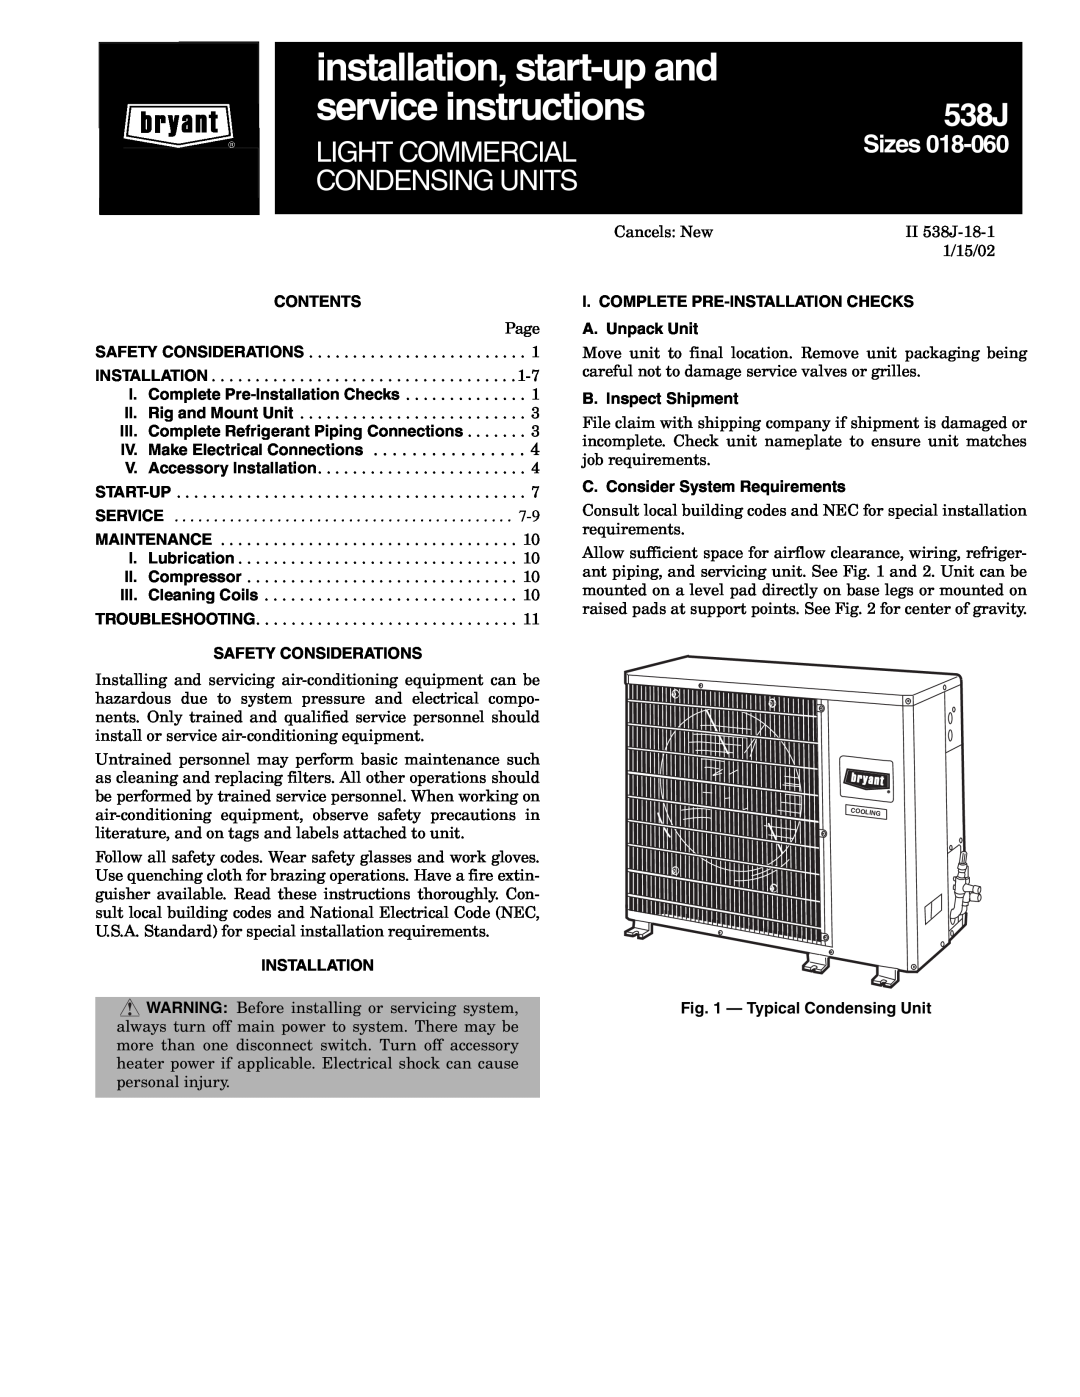 Bryant 538J-18-1 manual Contents, Safety Considerations, Installation, I. COMPLETE PRE-INSTALLATIONCHECKS A. Unpack Unit 